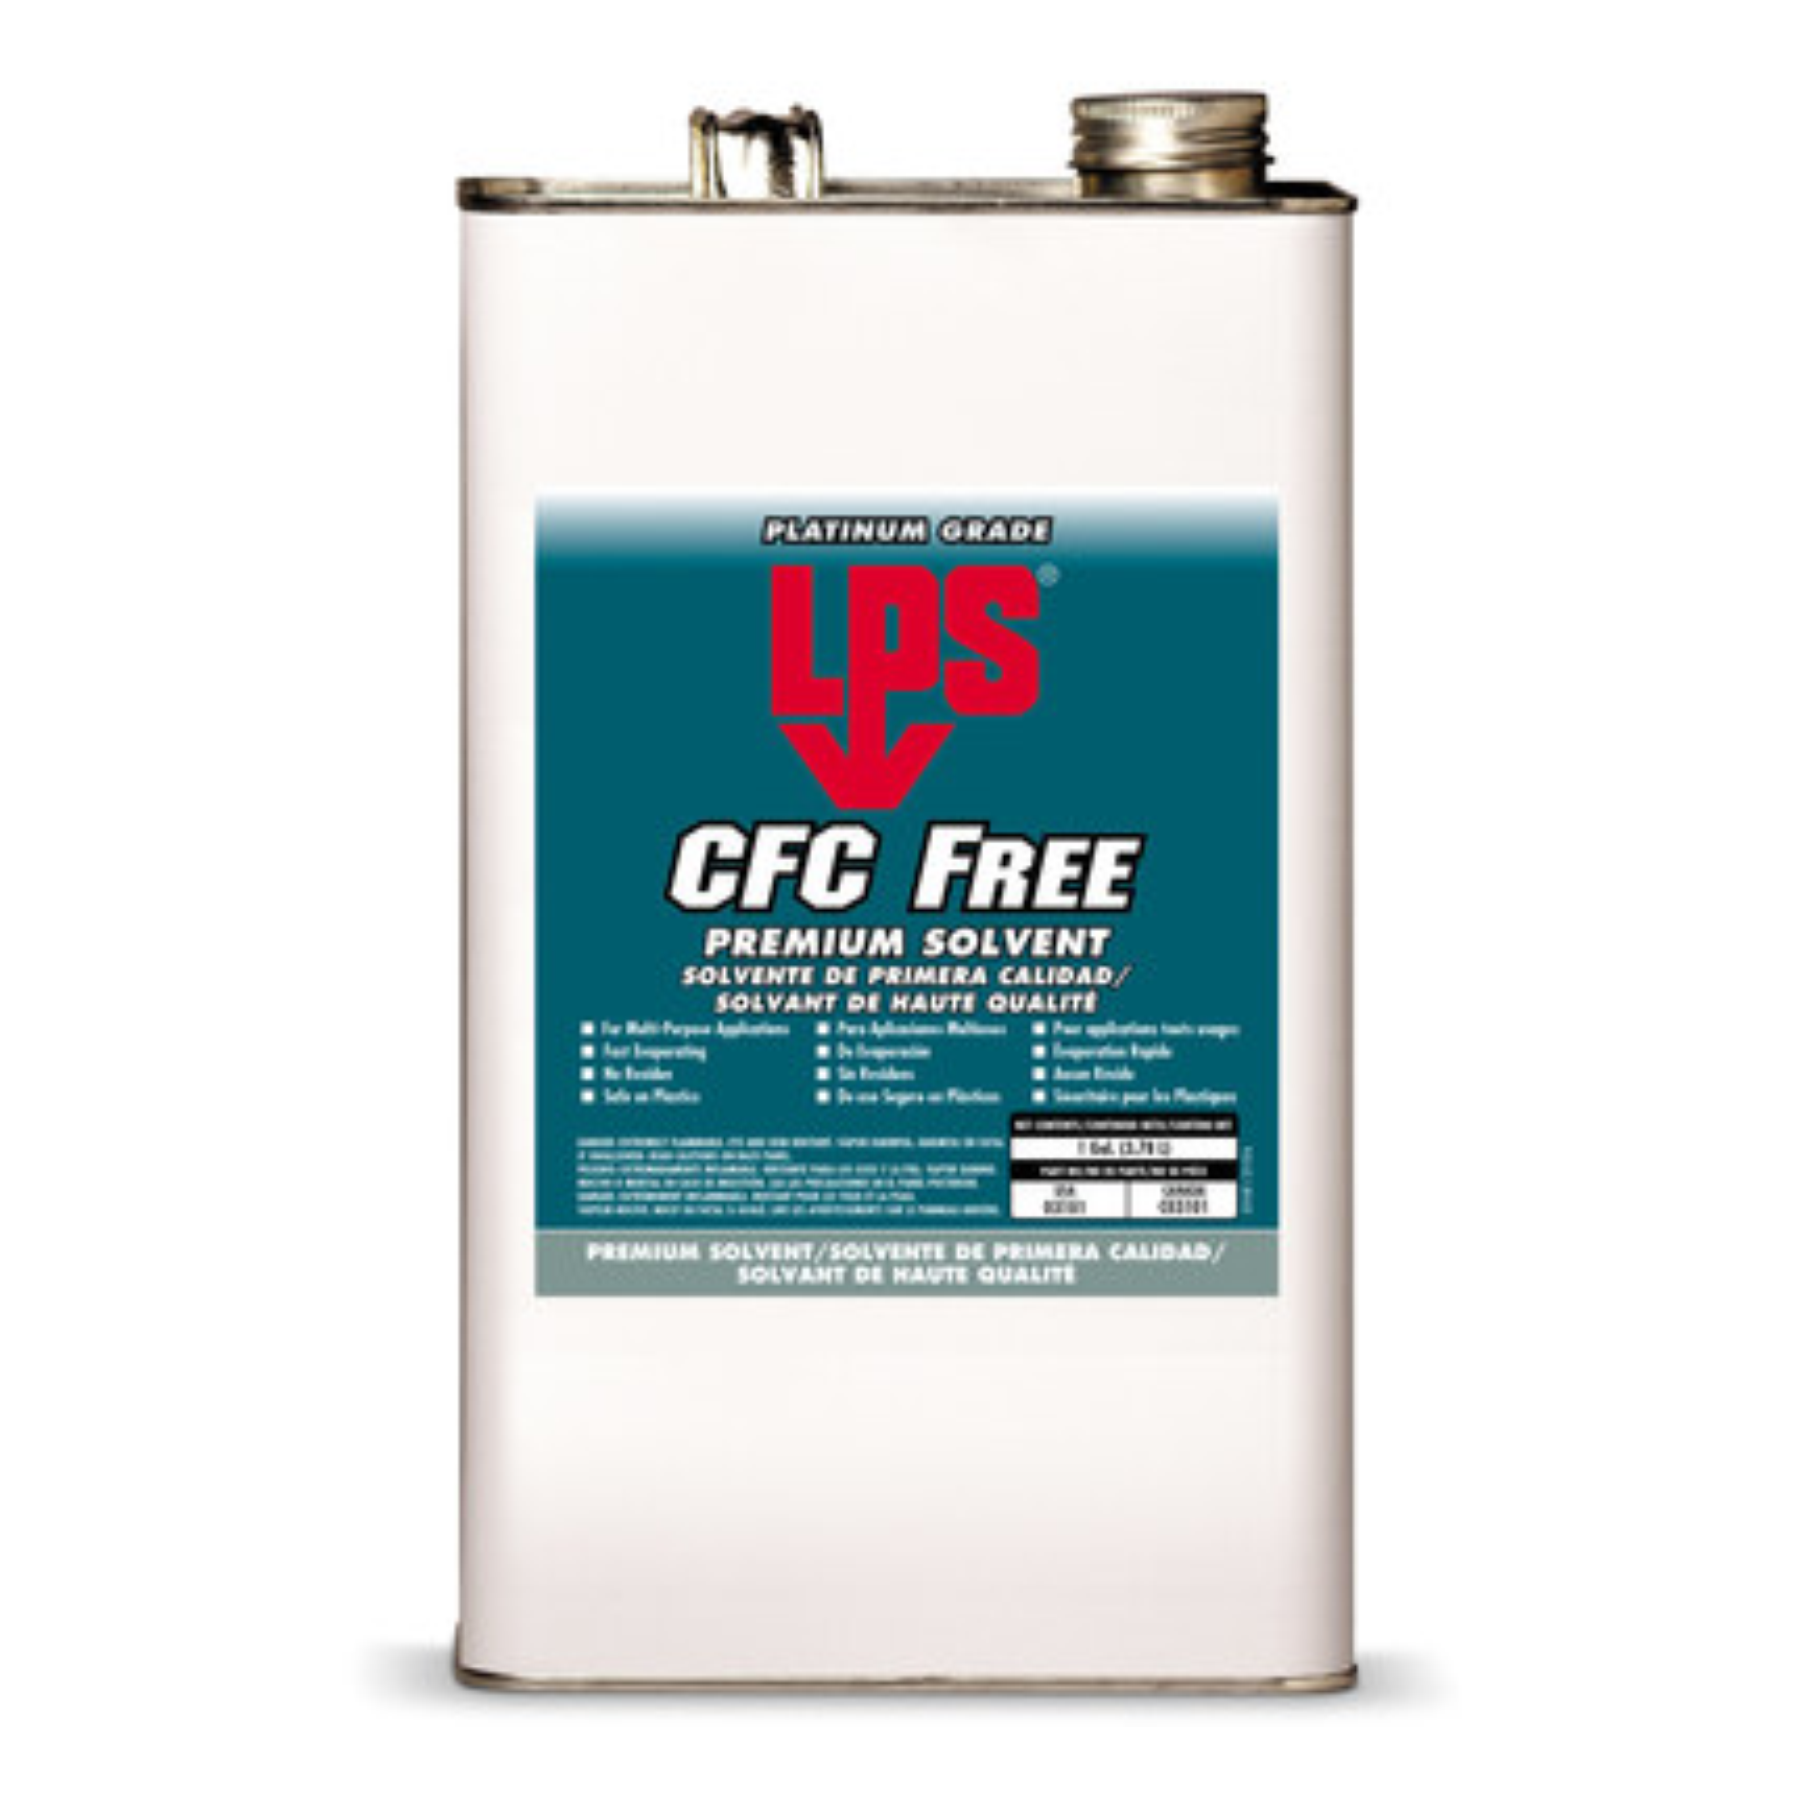 LPS CFC FREE ELECTRO CONTACT CLEANER | LIMPIA CONTACTOS 03101